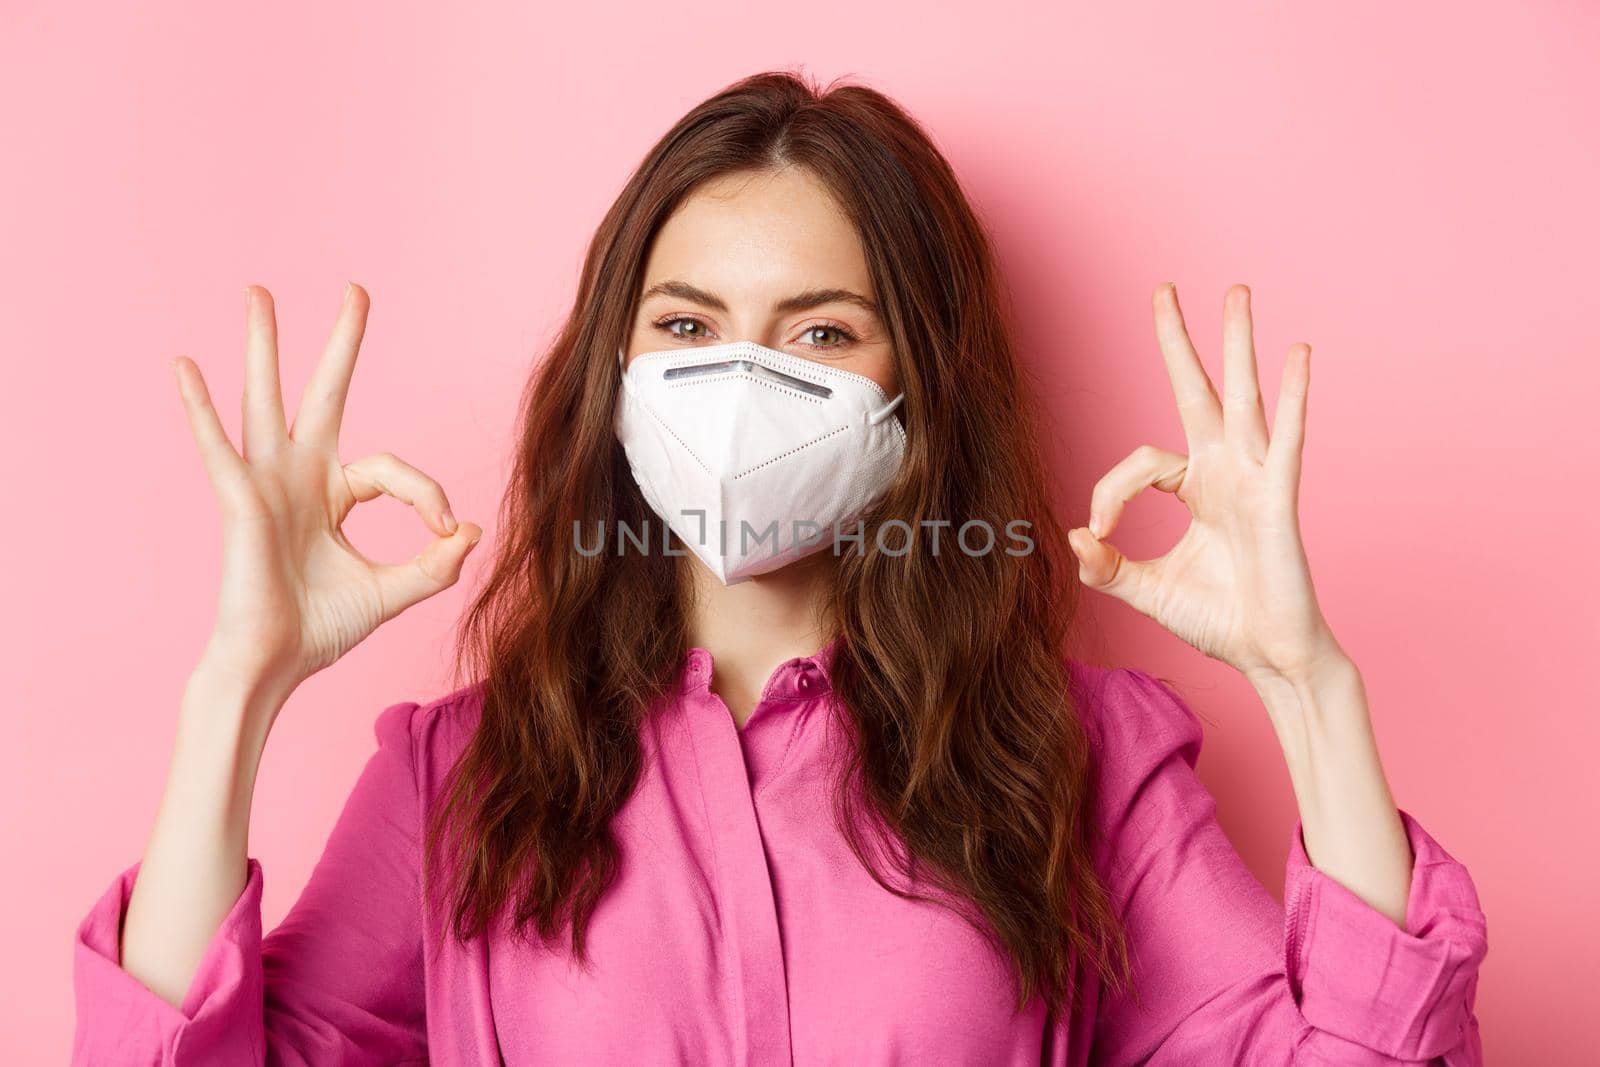 Coronavirus, preventive measures and health concept. Close up portrait of good-looking woman wears her medical respirator from covid-19, shows okay signs and smiling pleased.